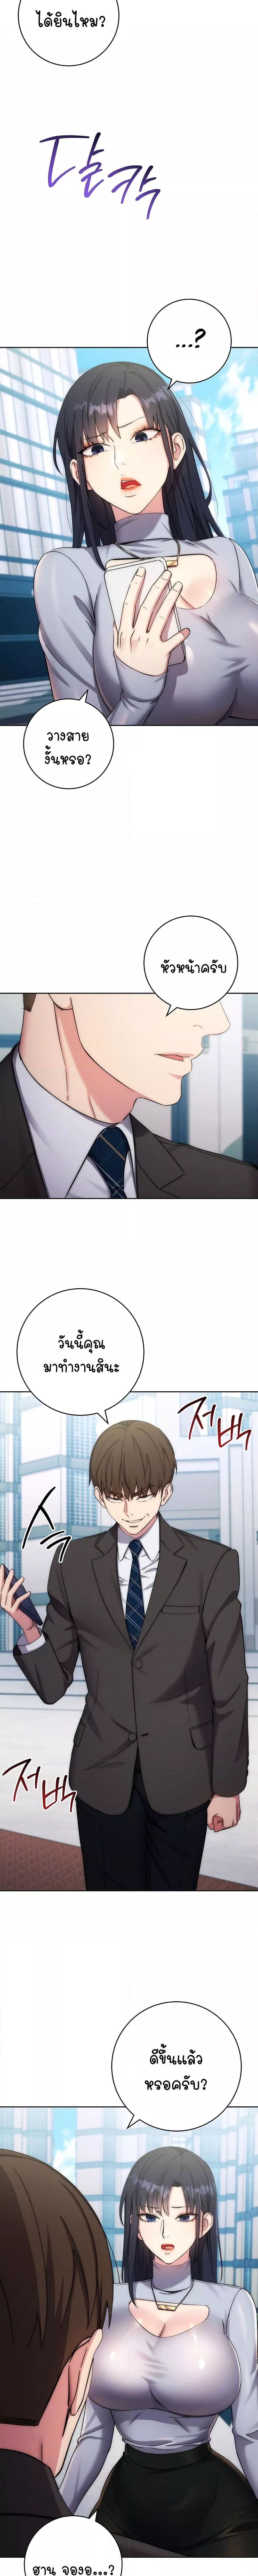 Outsider: The Invisible Man ตอนที่ 11 ภาพ 1